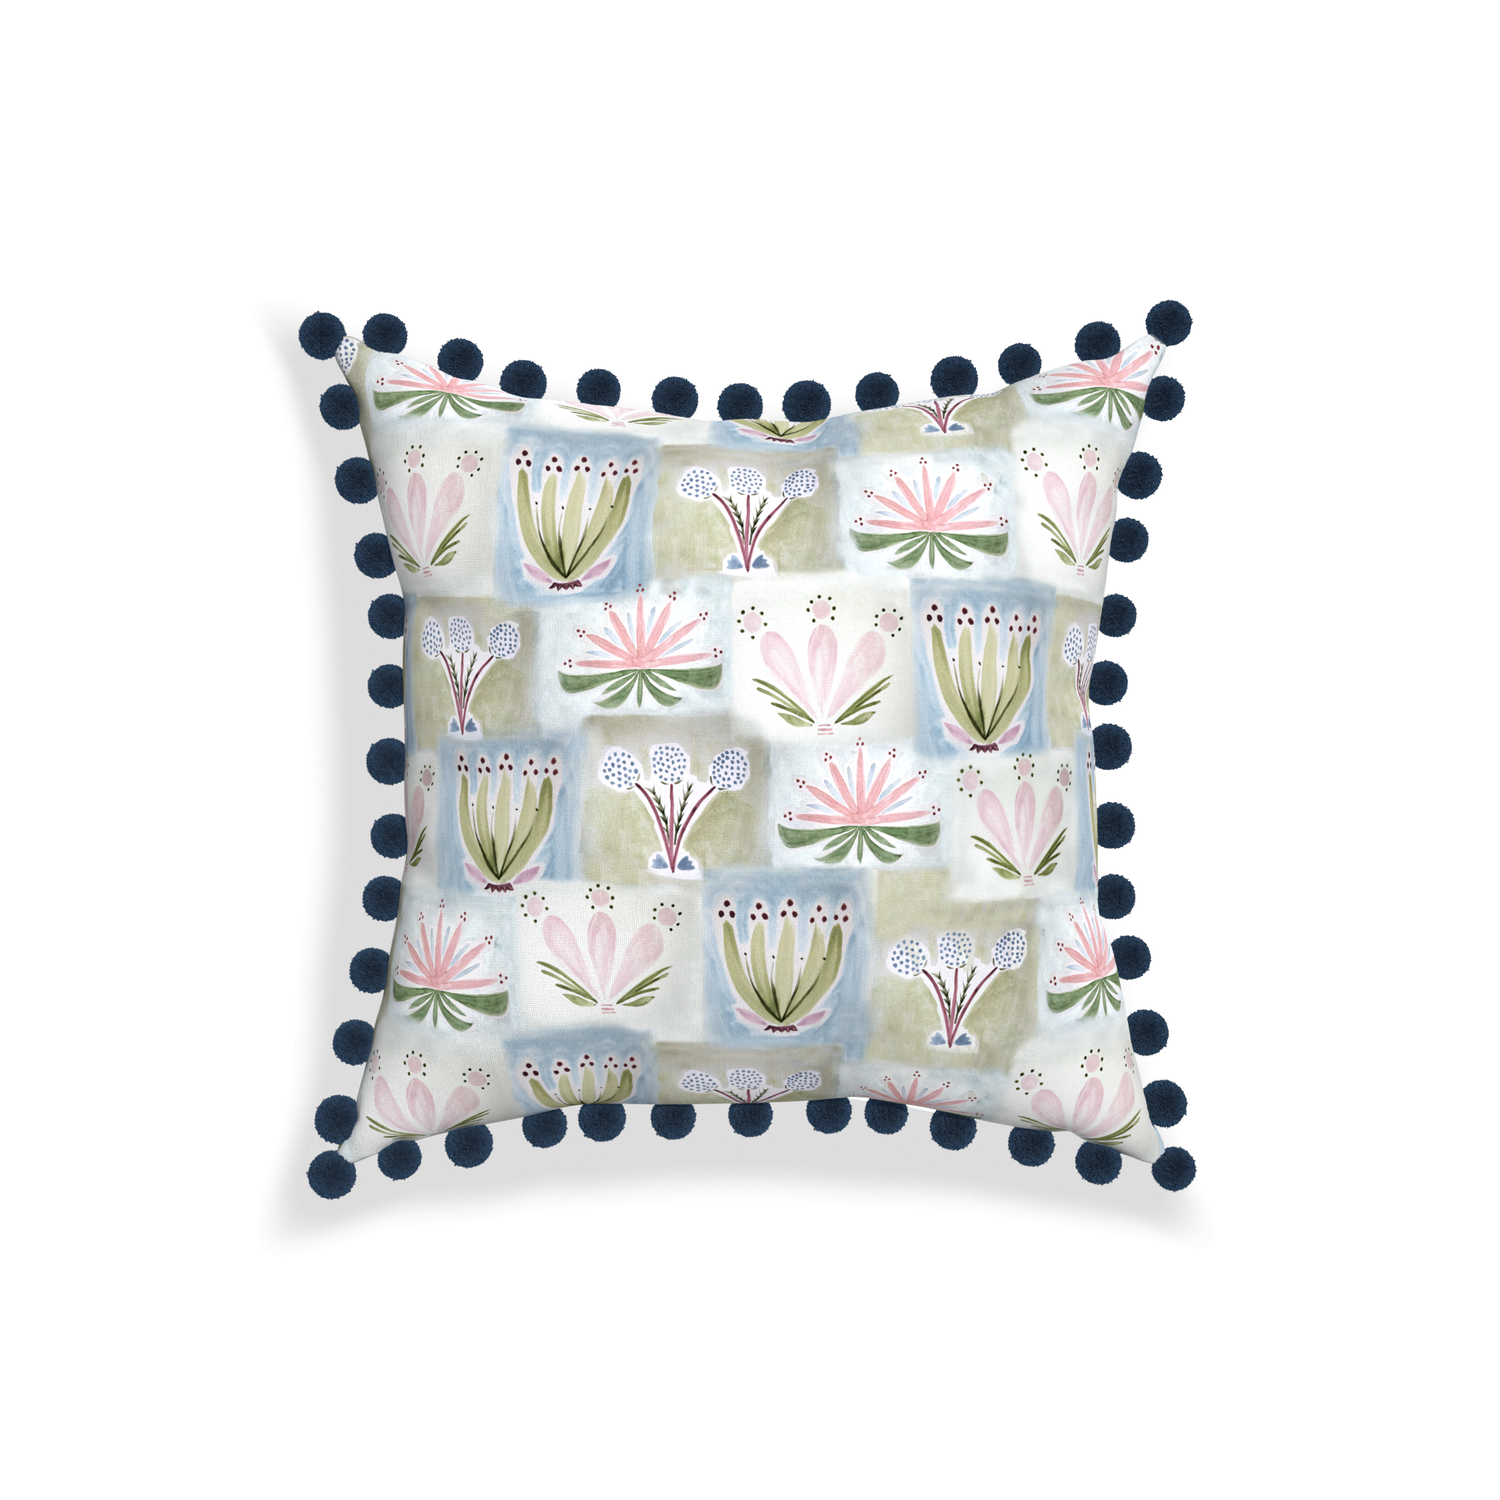 18-square harper custom hand-painted floralpillow with c on white background